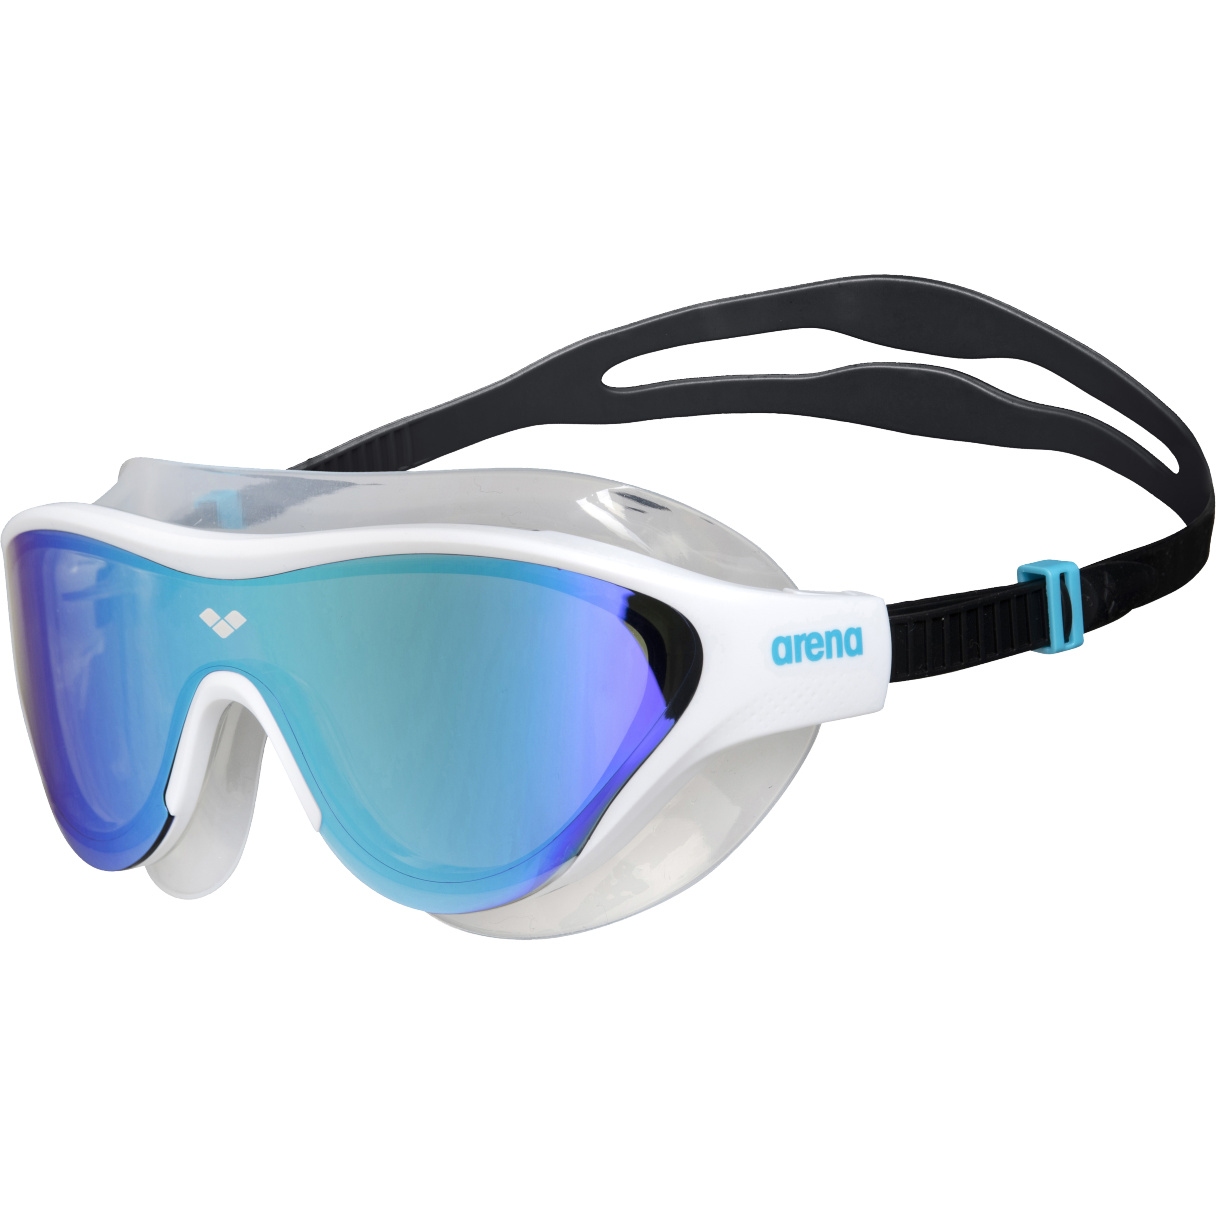 Image of arena The One Mask Mirror Swimming Goggles - Blue - White/Black